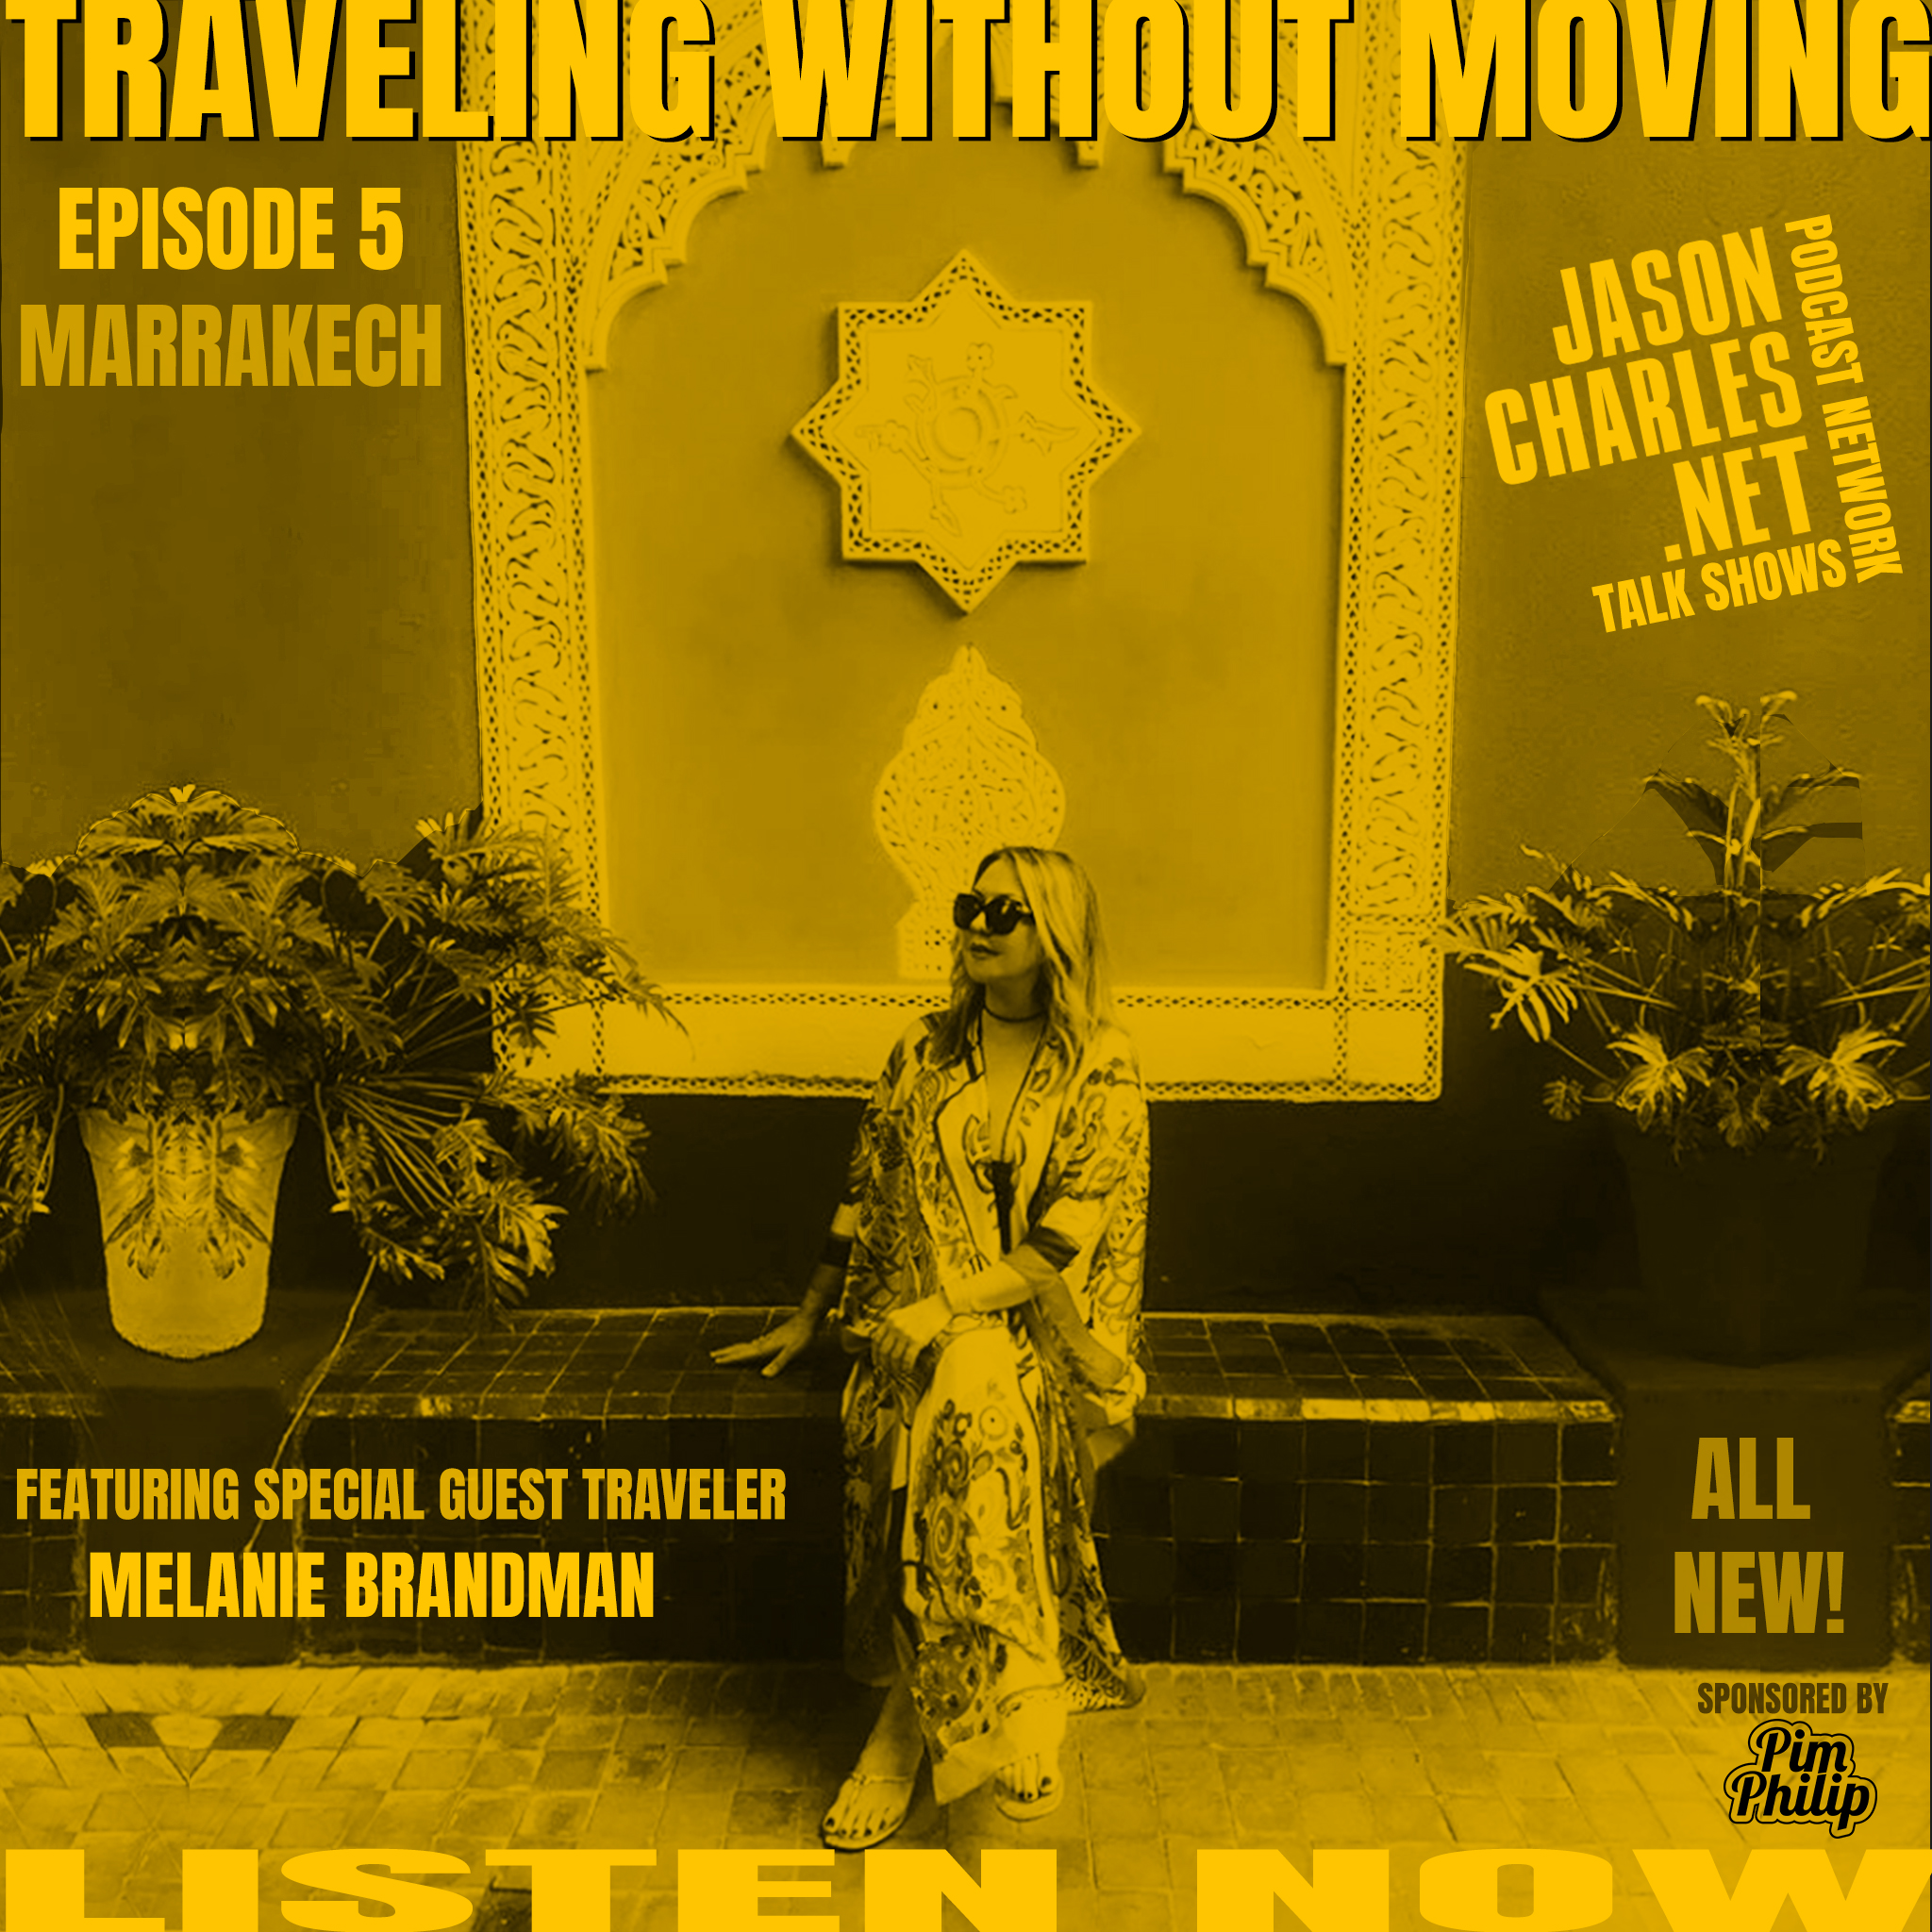 TRAVELING WITHOUT MOVING Episode 5 Marrakech with Melanie Brandman